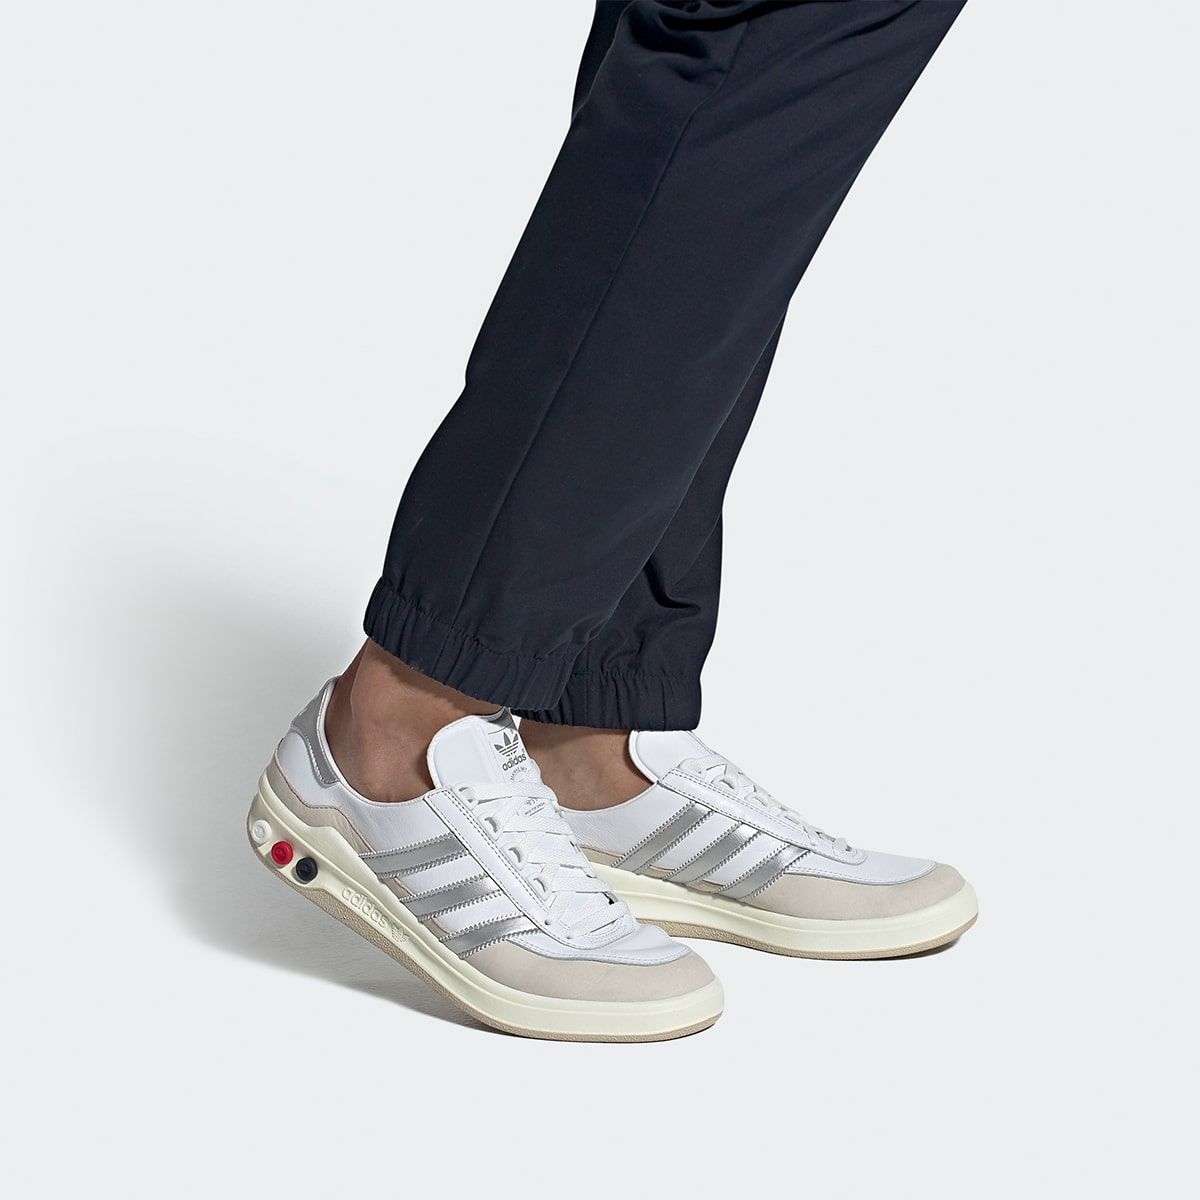 adidas spezial galaxy buy clothes shoes online